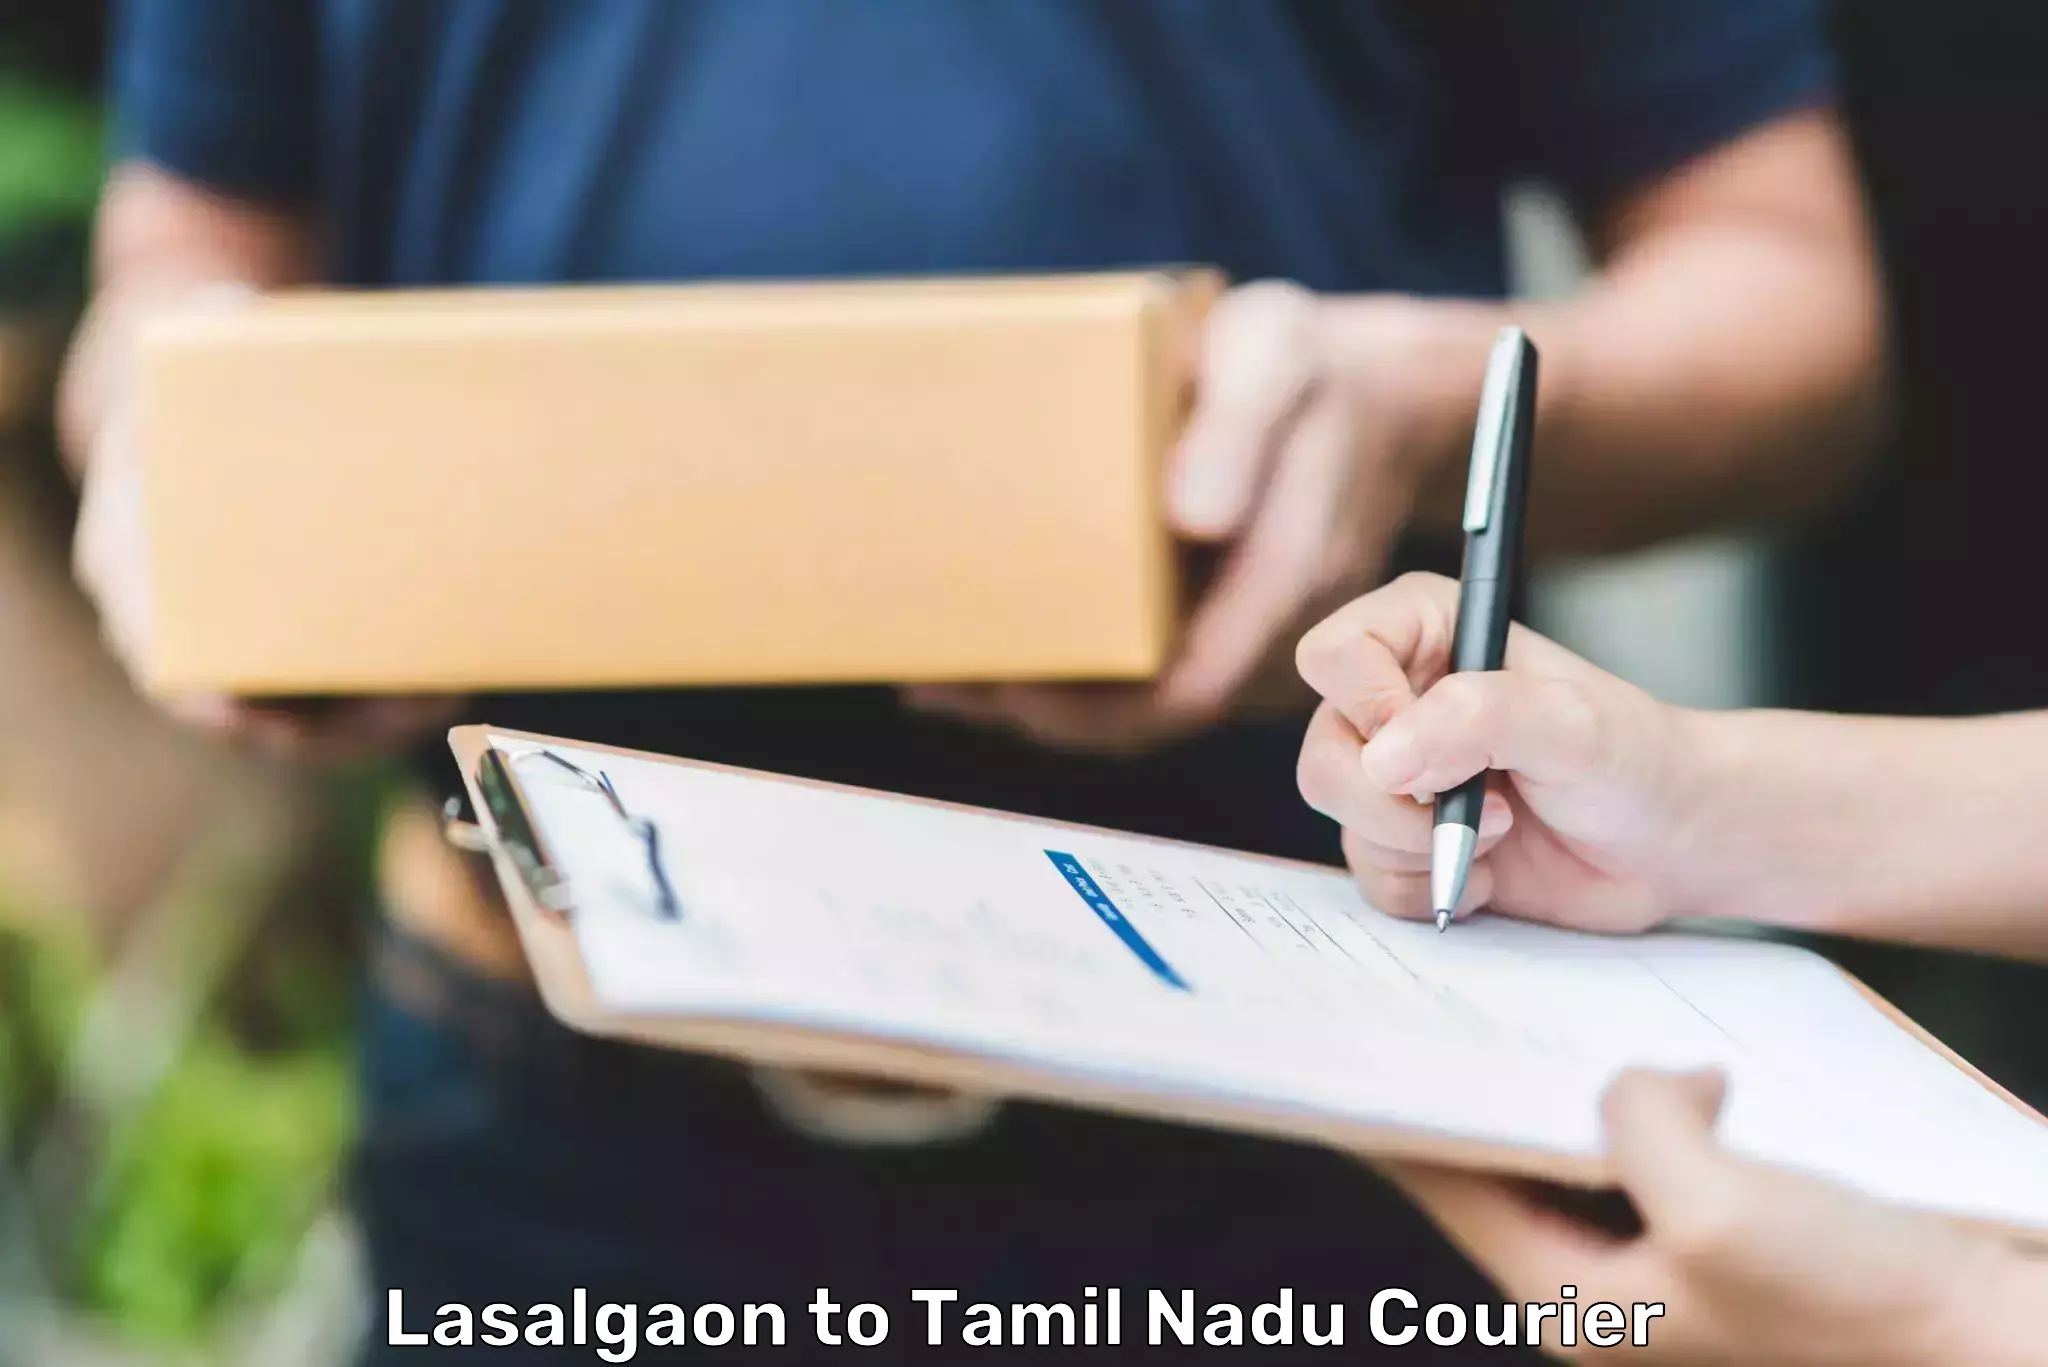 Flexible delivery schedules Lasalgaon to Sri Ramachandra Institute of Higher Education and Research Chennai